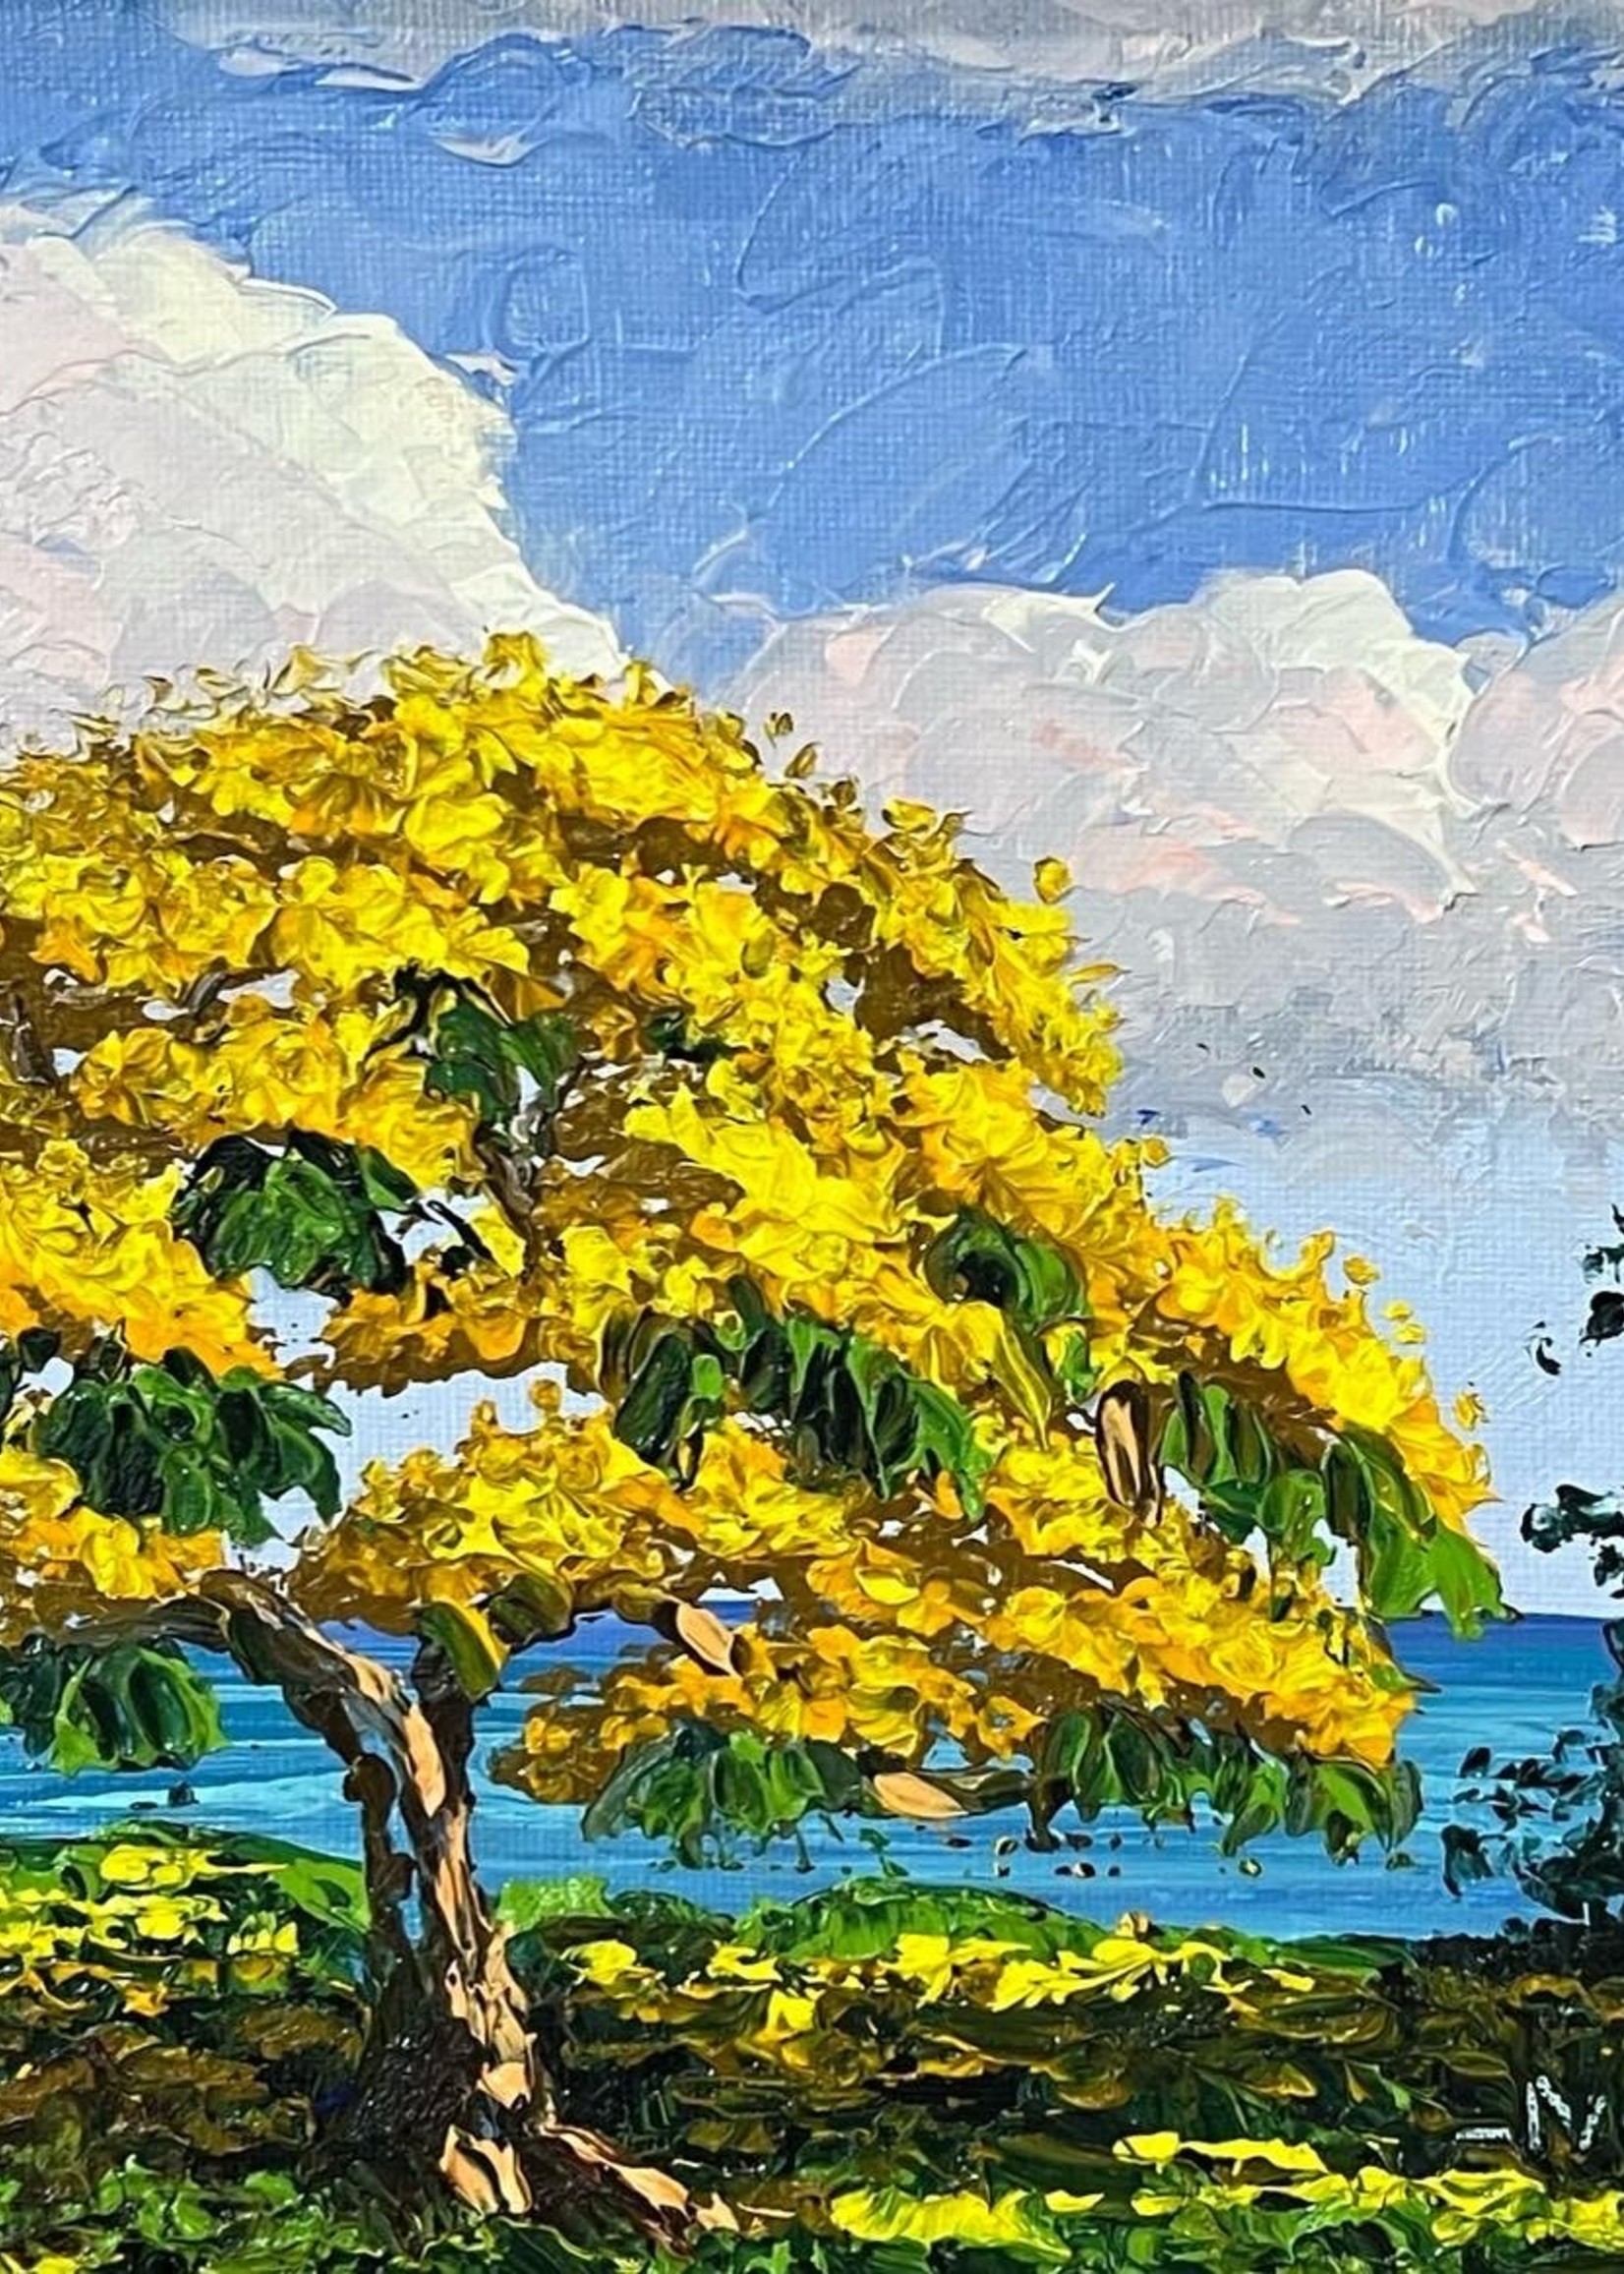 Backus, Highwaymen and Indian River School SET OF 3: Red Poinciana/Jacaranda/Yellow Poinciana by Mark Stanford, oil on canvas framed, RARE